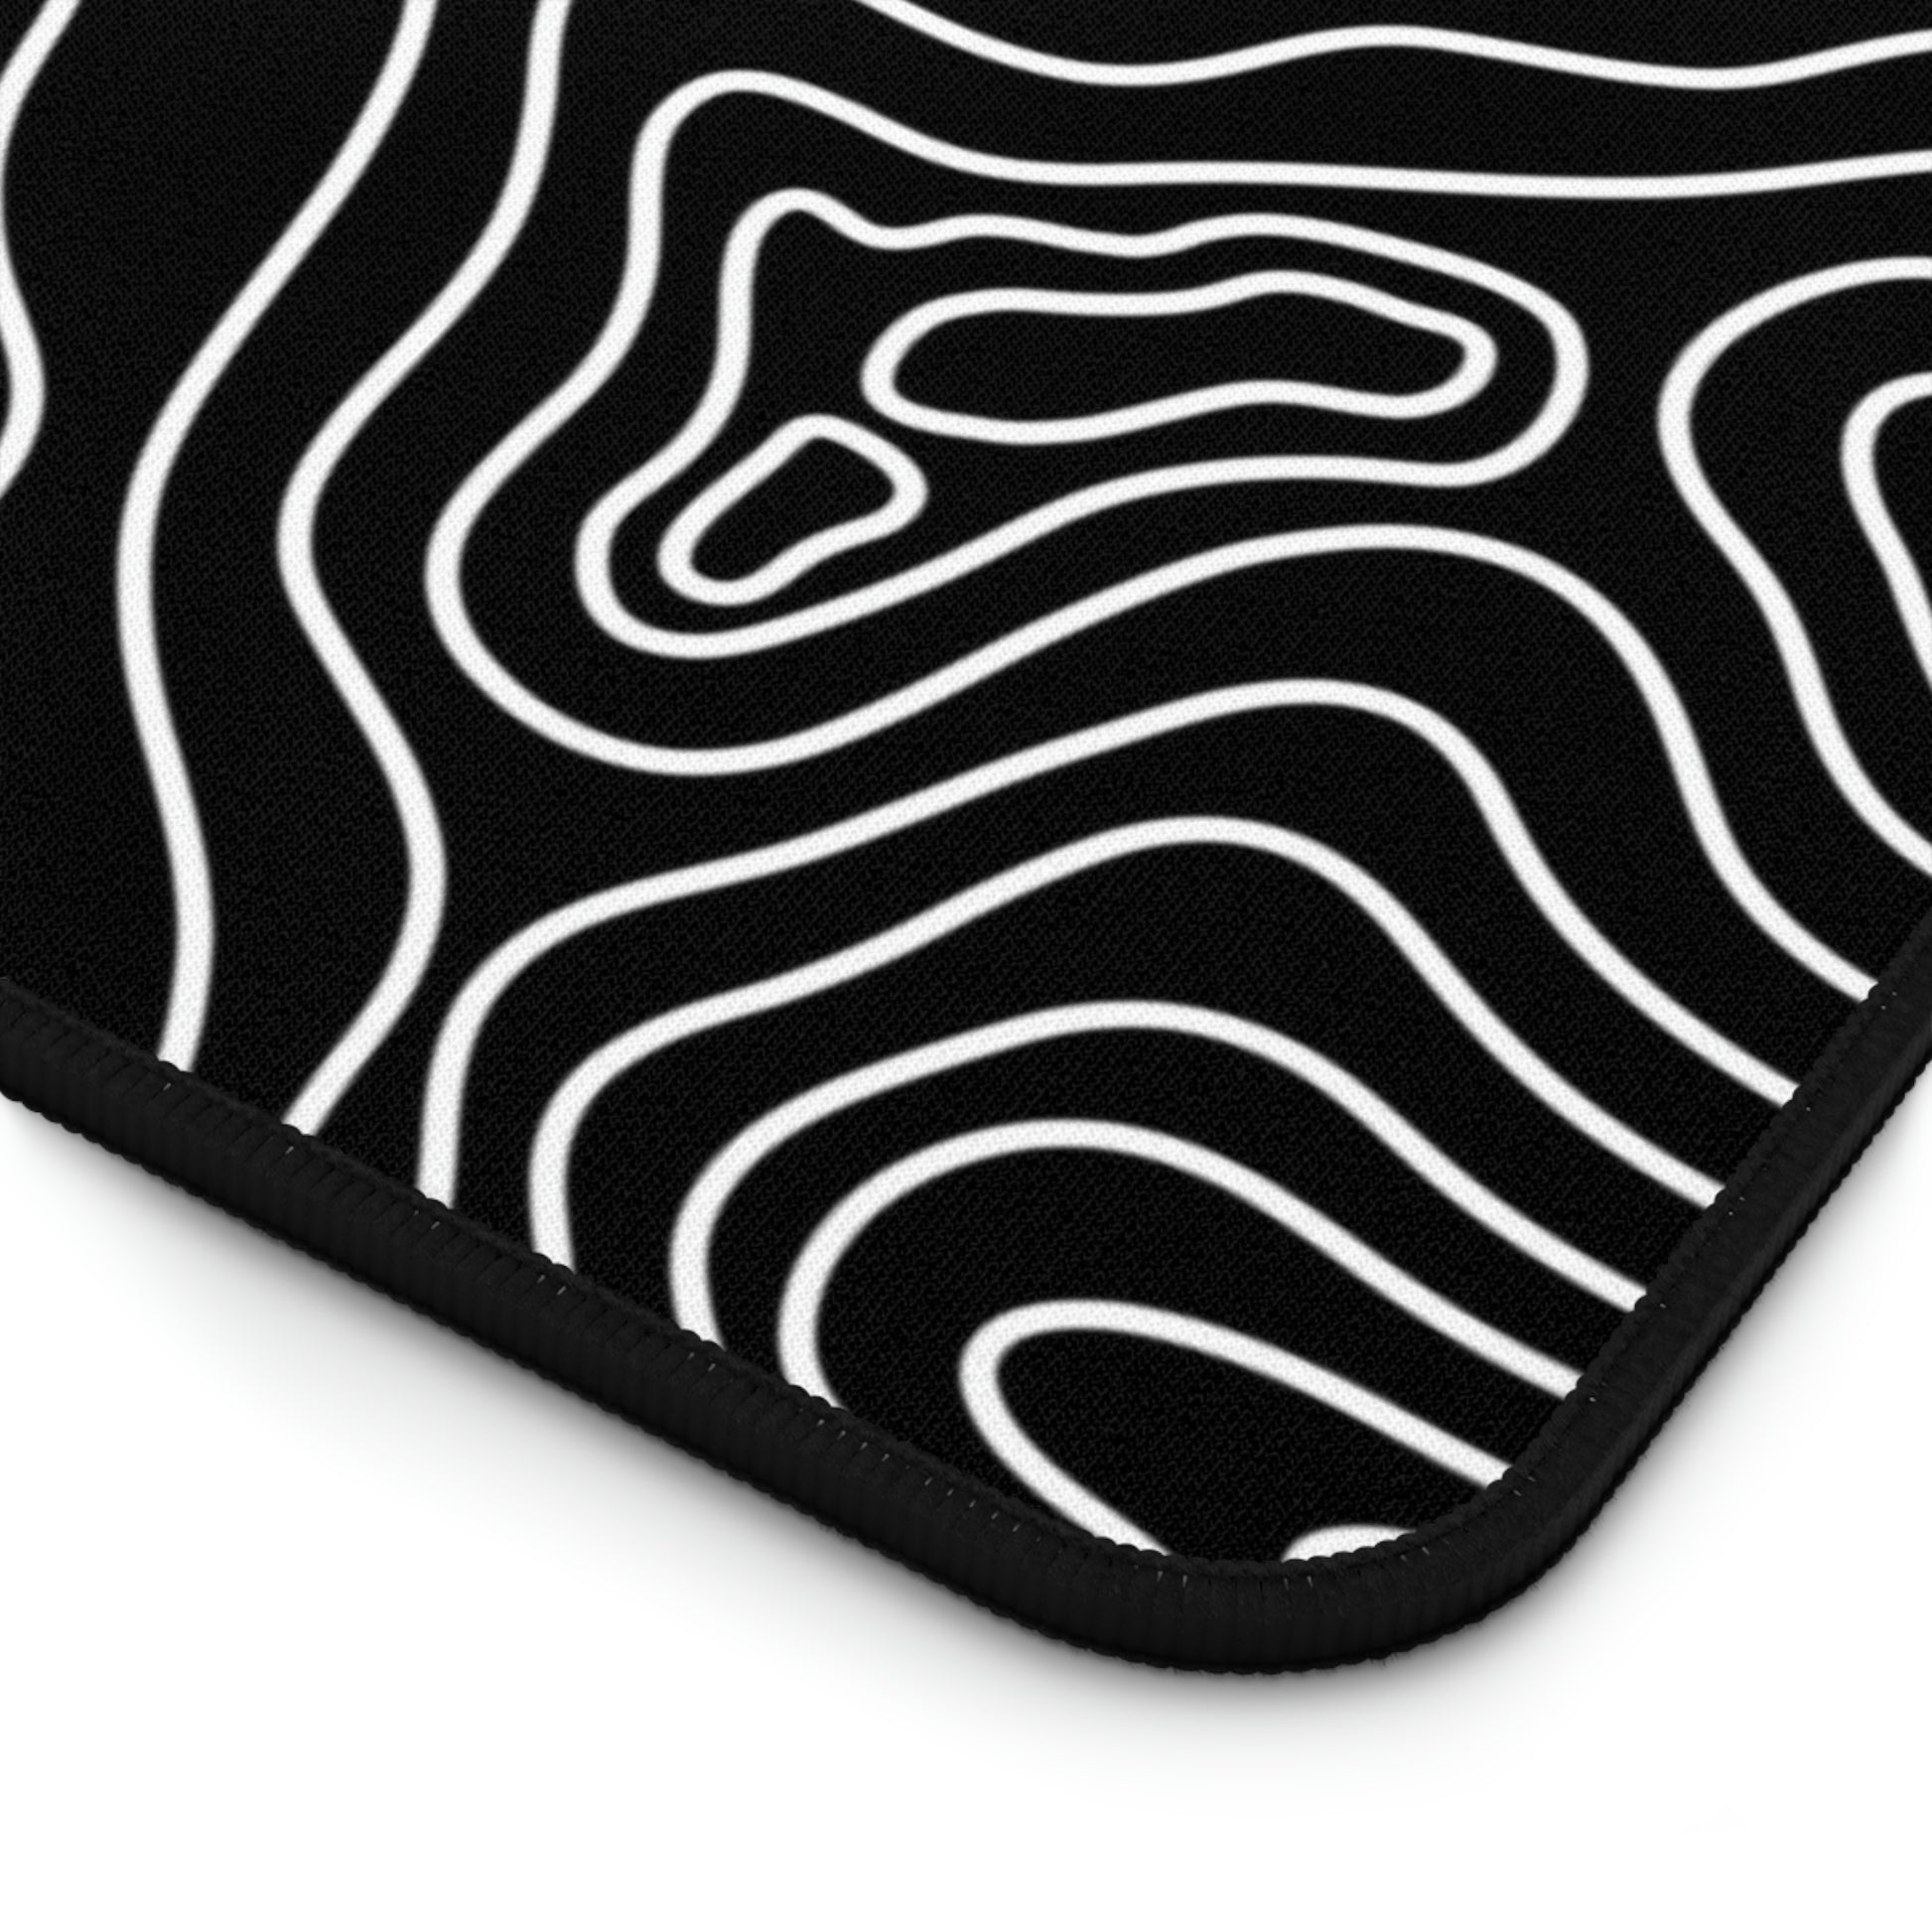 The bottom right corner of a 31" x 15.5" black desk mat with white topographic lines.